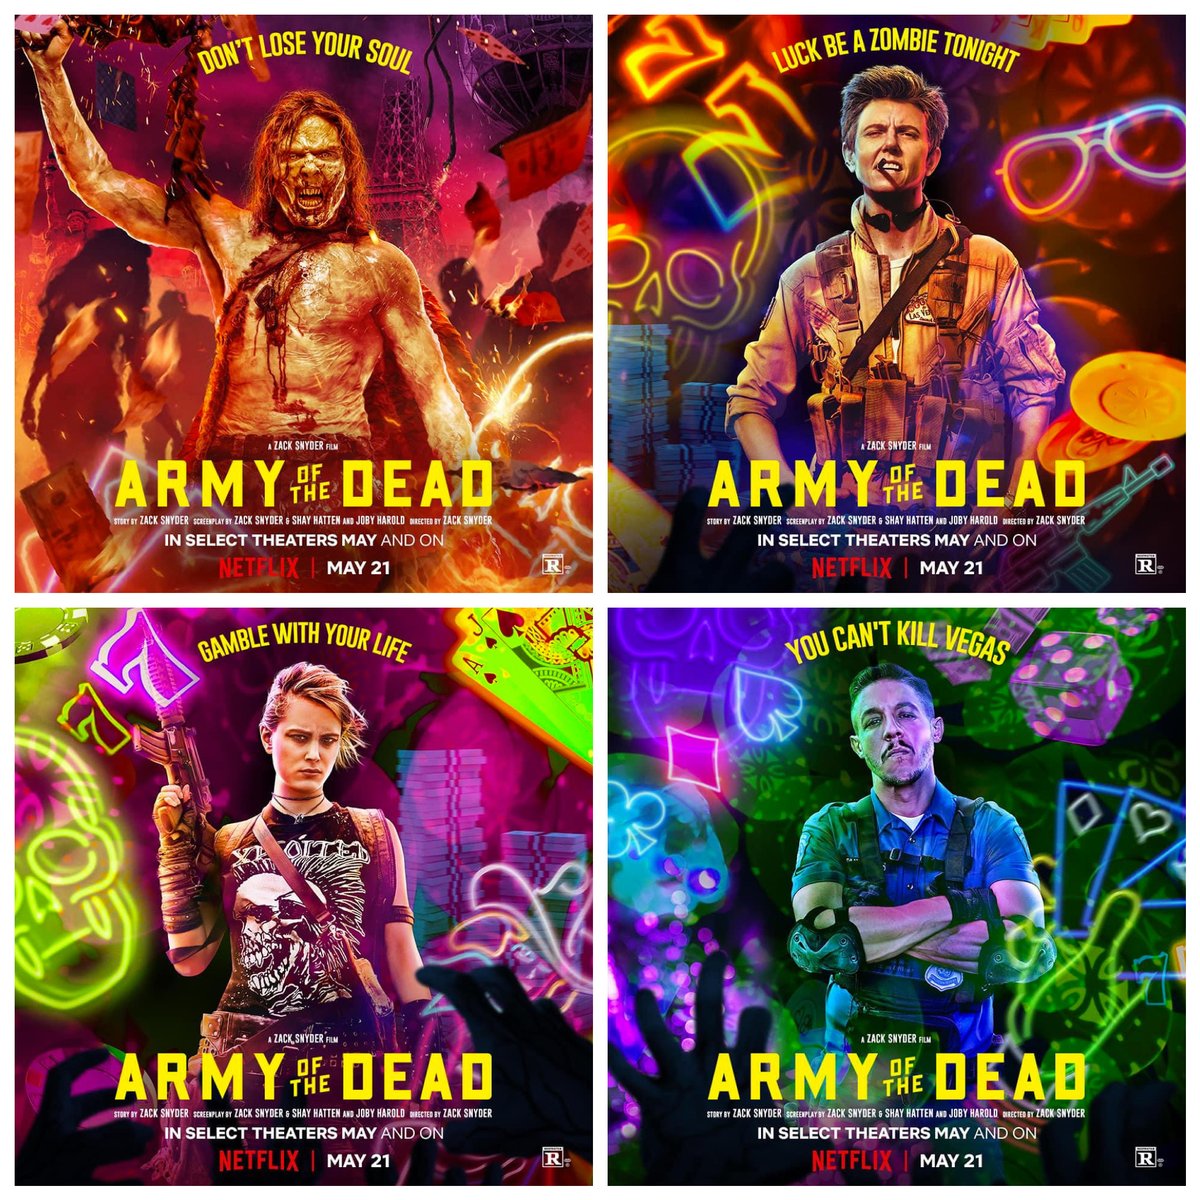 #OscarsFanFavorite #StreamArmyOfTheDead #ArmyOfTheDead